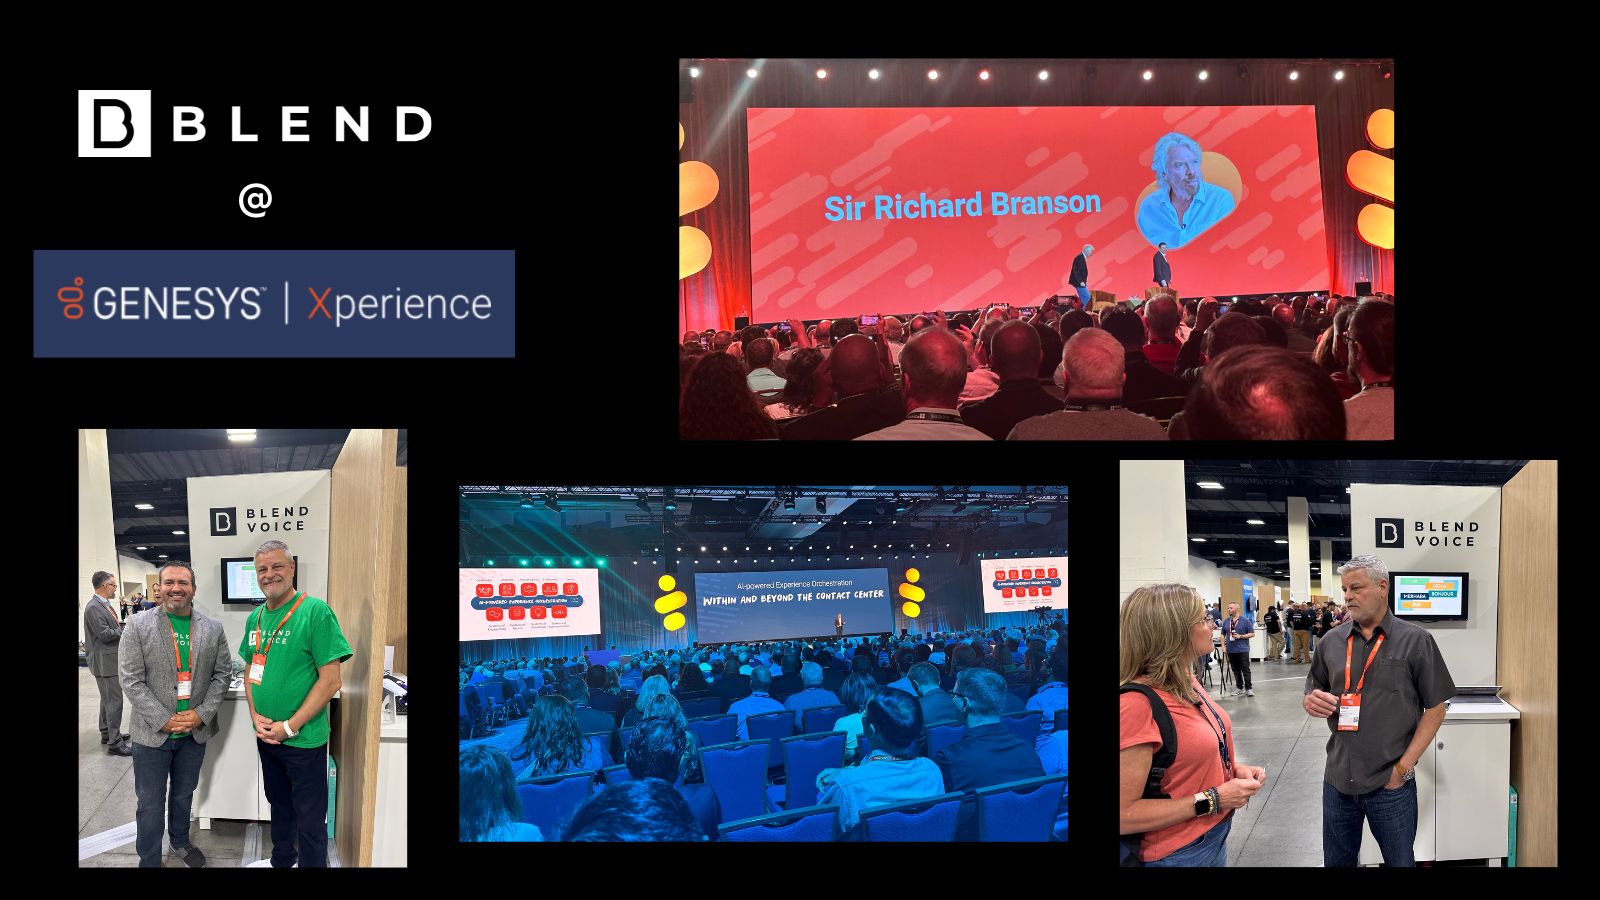 BLEND Voice Enjoys Mile-High IVR Reunion at Genesys Xperience